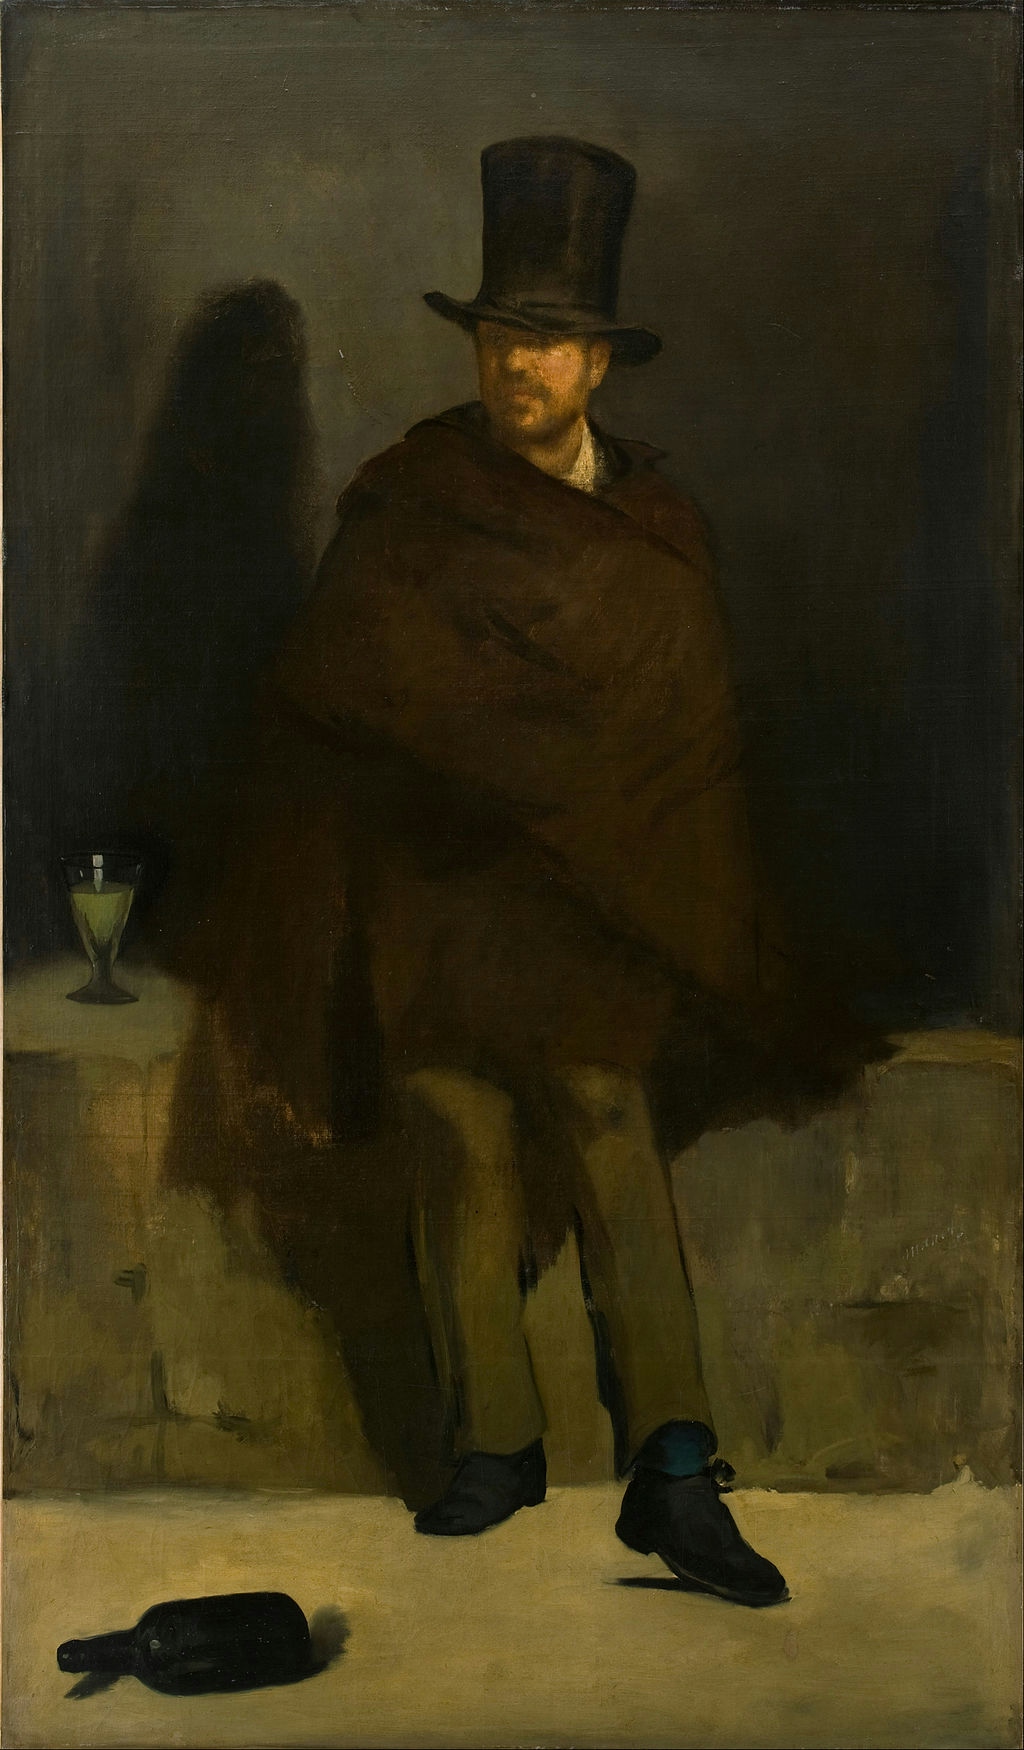 A painting of a man wearing a black shawl and top hat. He is standing beside a low wall, with a glass containing green liquid beside him and a discarded bottle on its side at his feet.